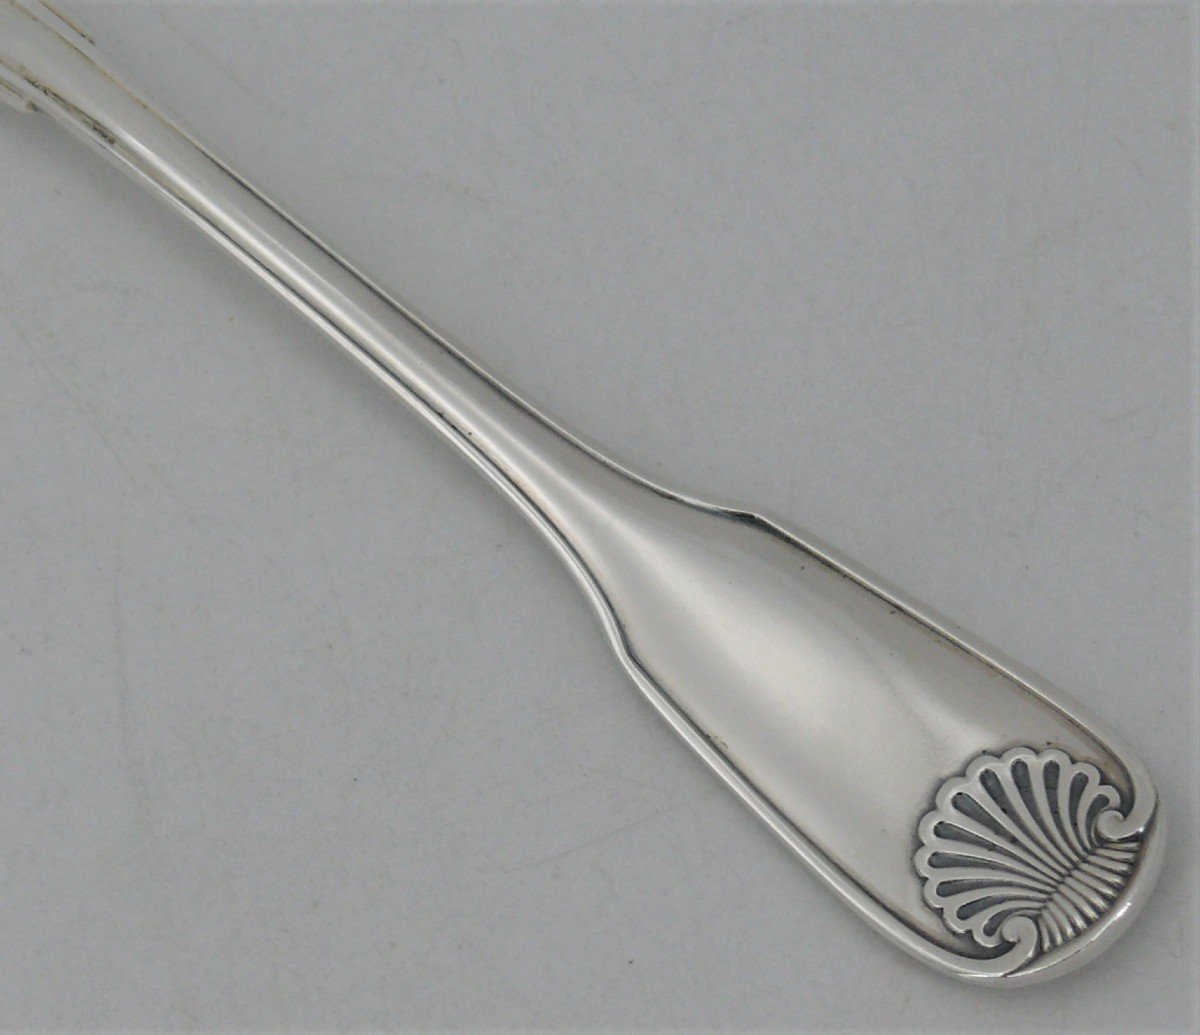 Christofle Model Vendôme/arcantia/coquille, 12 Fish Cutlery, Silver Plated, 24 Pieces.-photo-1